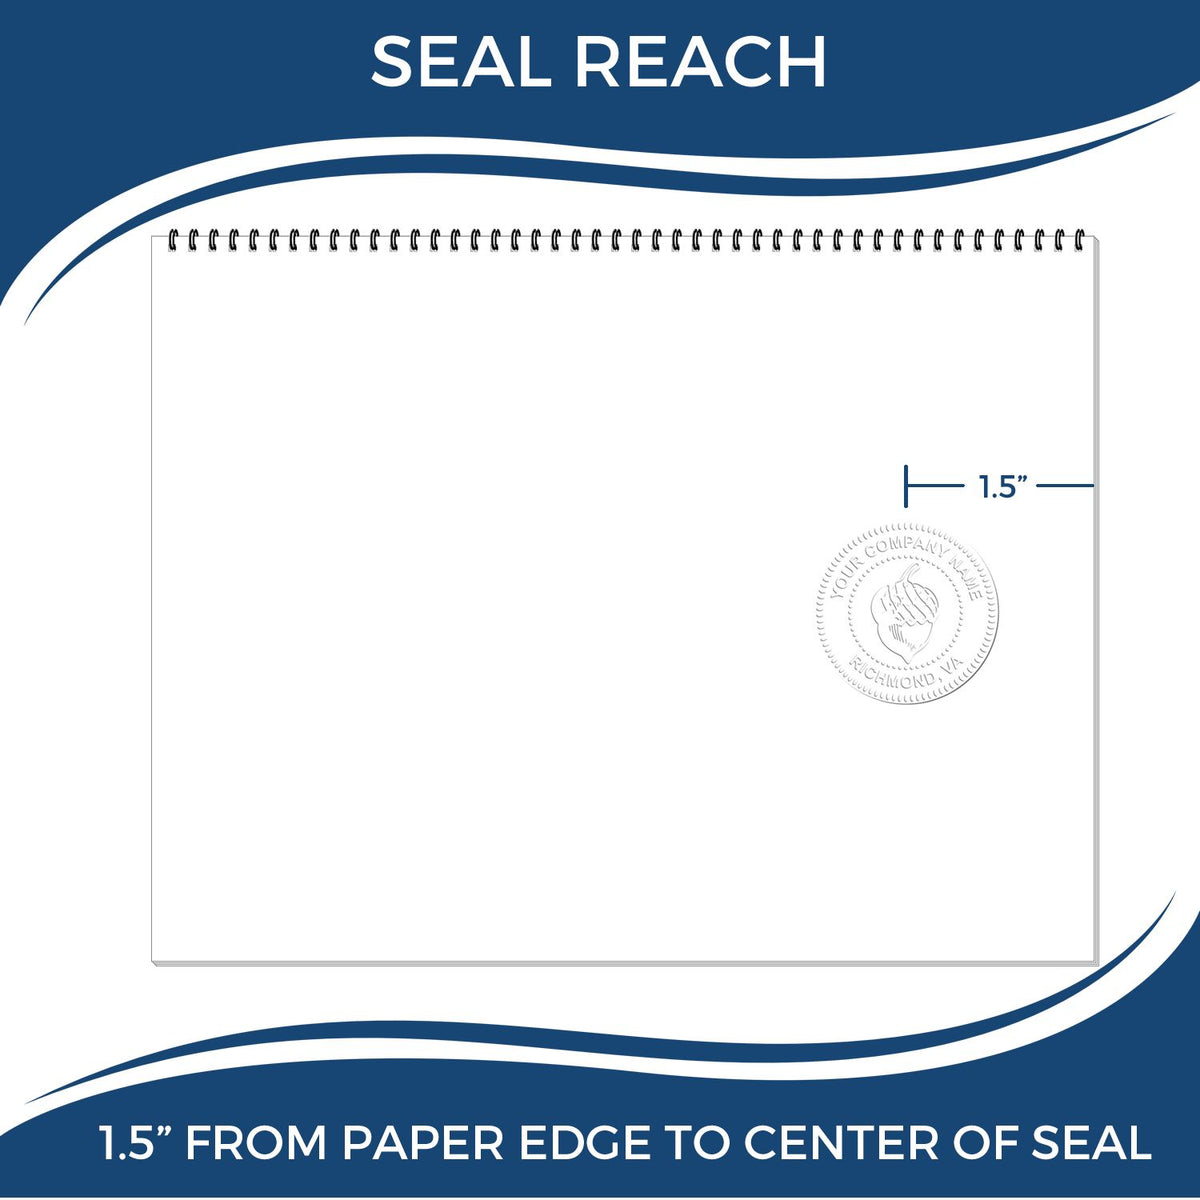 An infographic showing the seal reach which is represented by a ruler and a miniature seal image of the Gift Guam Architect Seal